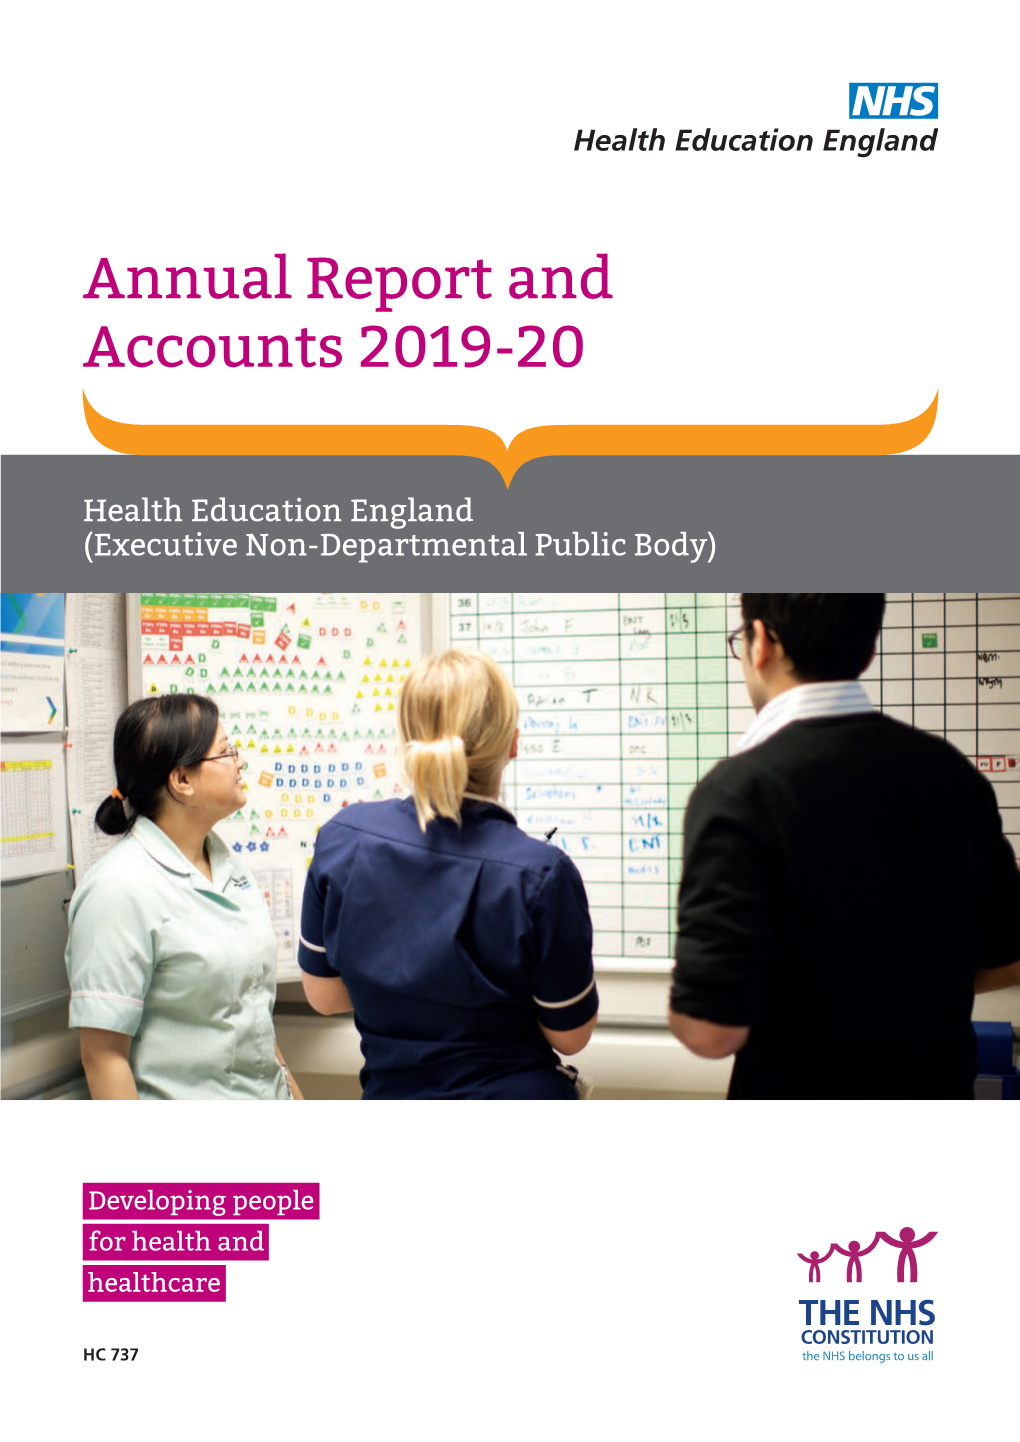 HEE Annual Report and Accounts